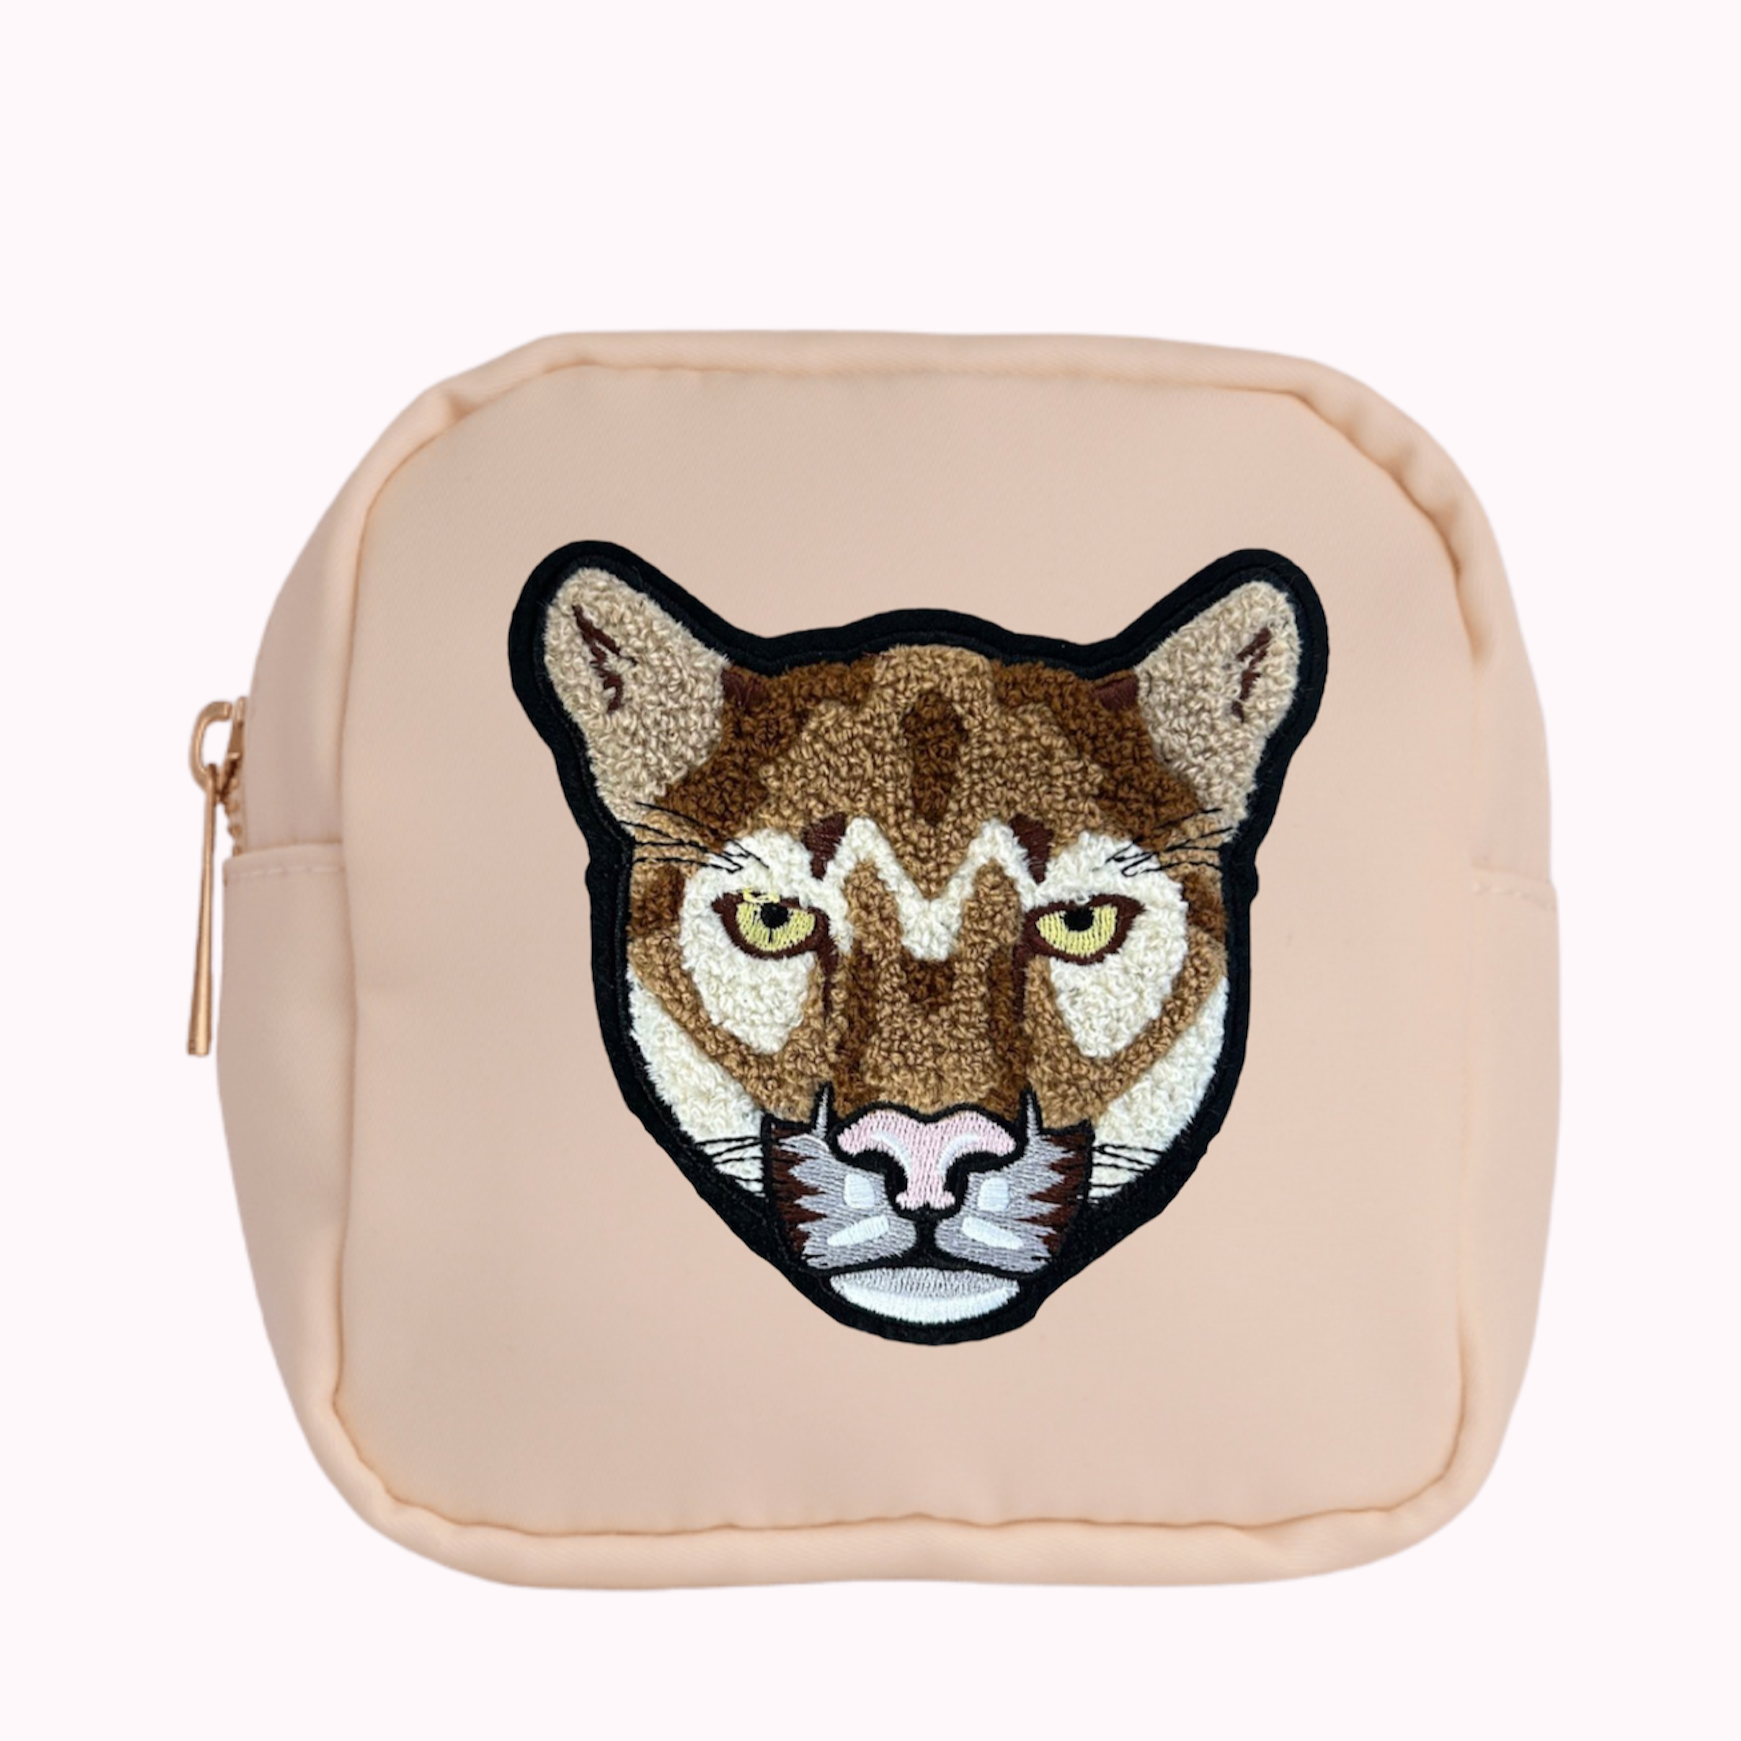 Cream mini crossbody bag with cougar patch. 